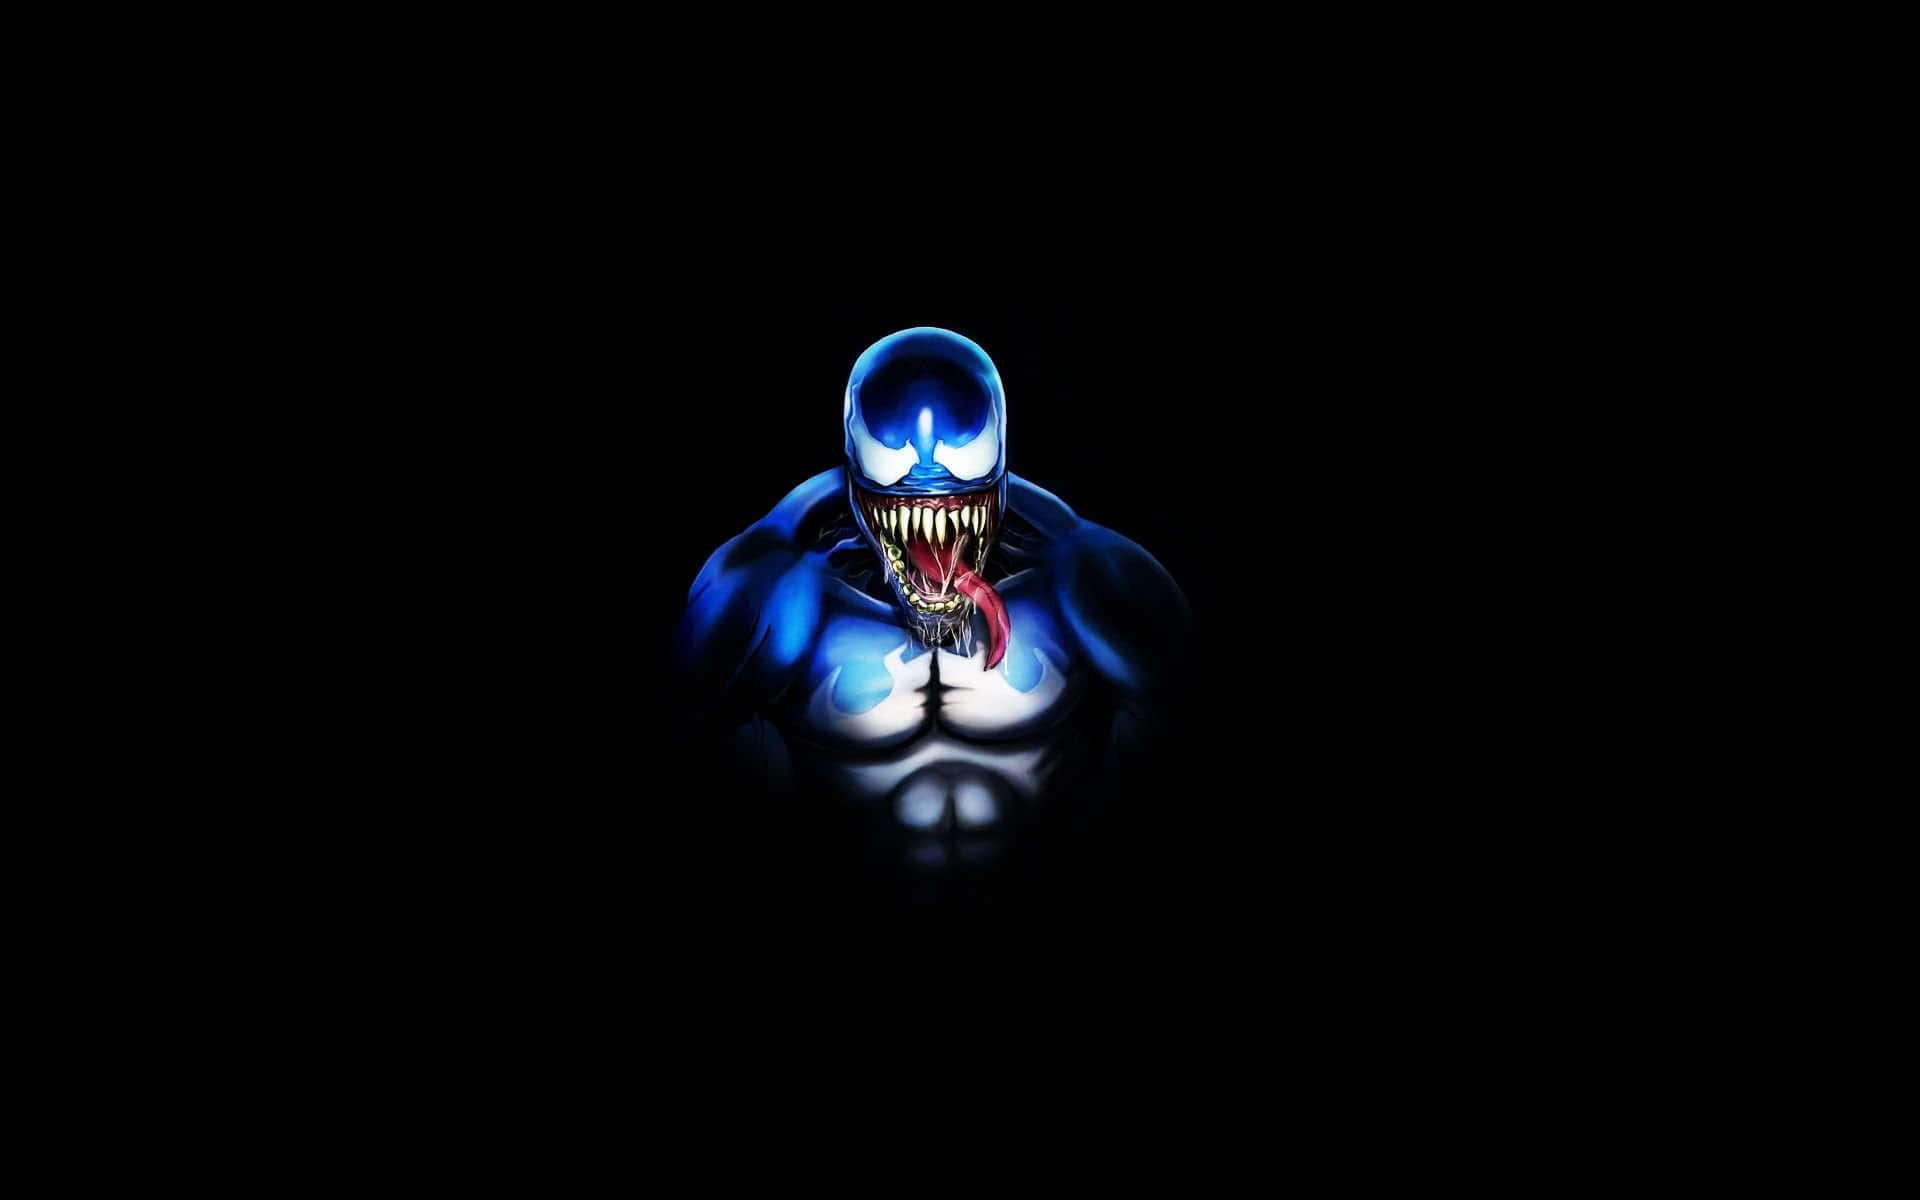 Venom In The Dark With His Mouth Open Wallpaper